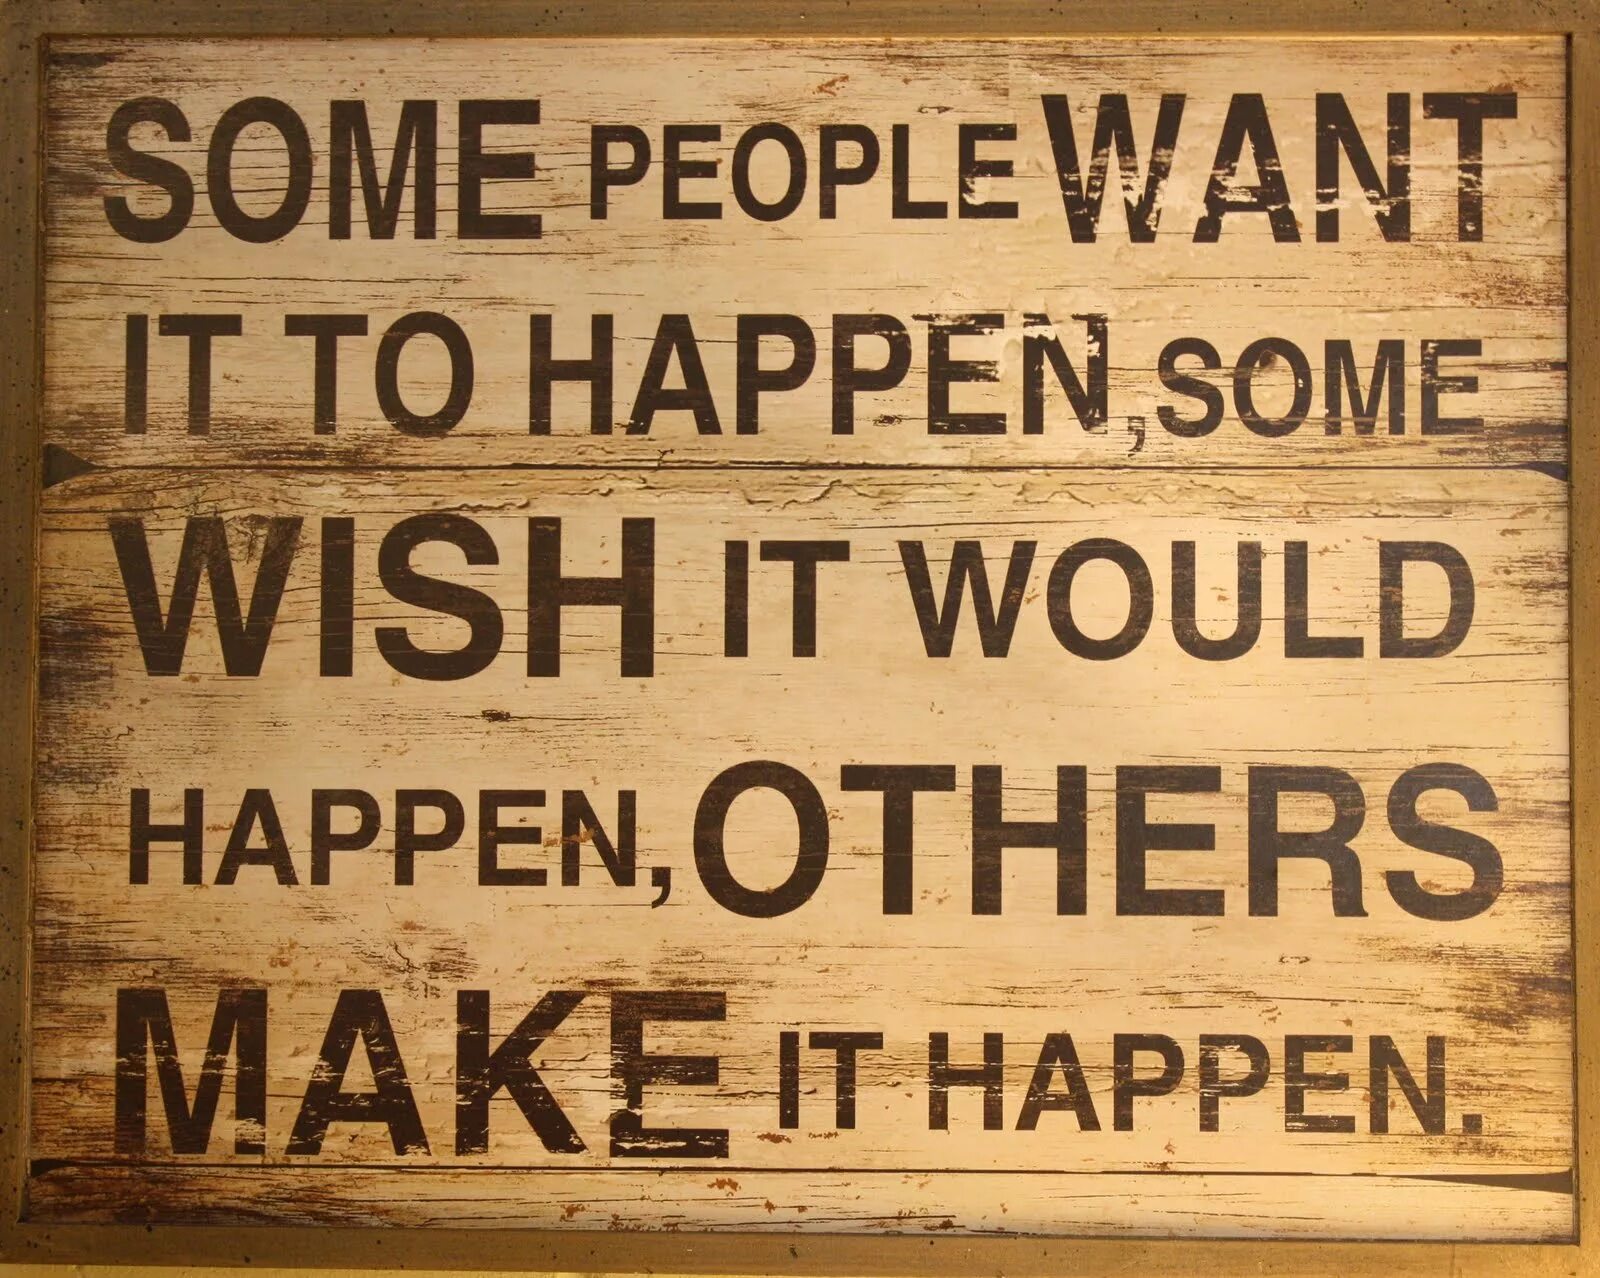 Some people. Will happen. Make it happen перевод на русский. We make it happen. People want to live in an